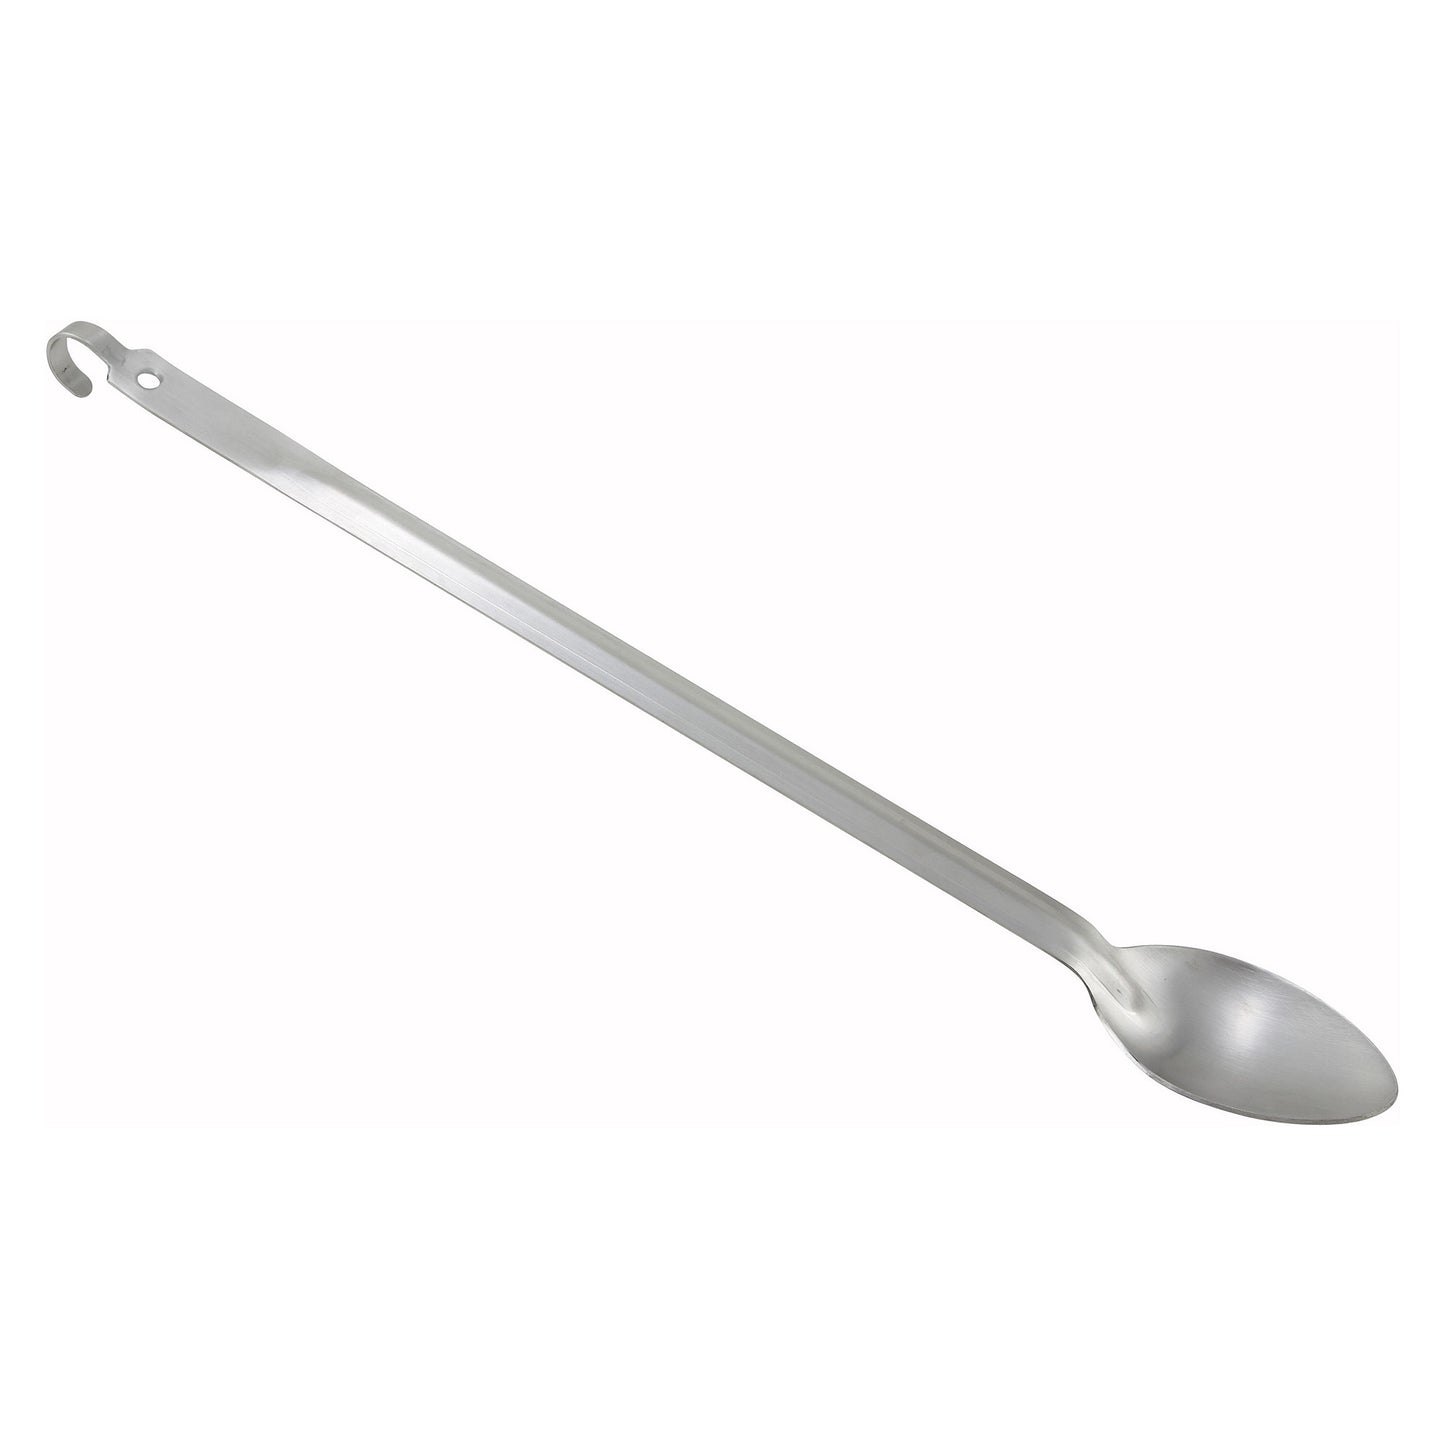 BHKS-21 - 21" Heavy-Duty Basting Spoon with Hook, 2mm - Solid